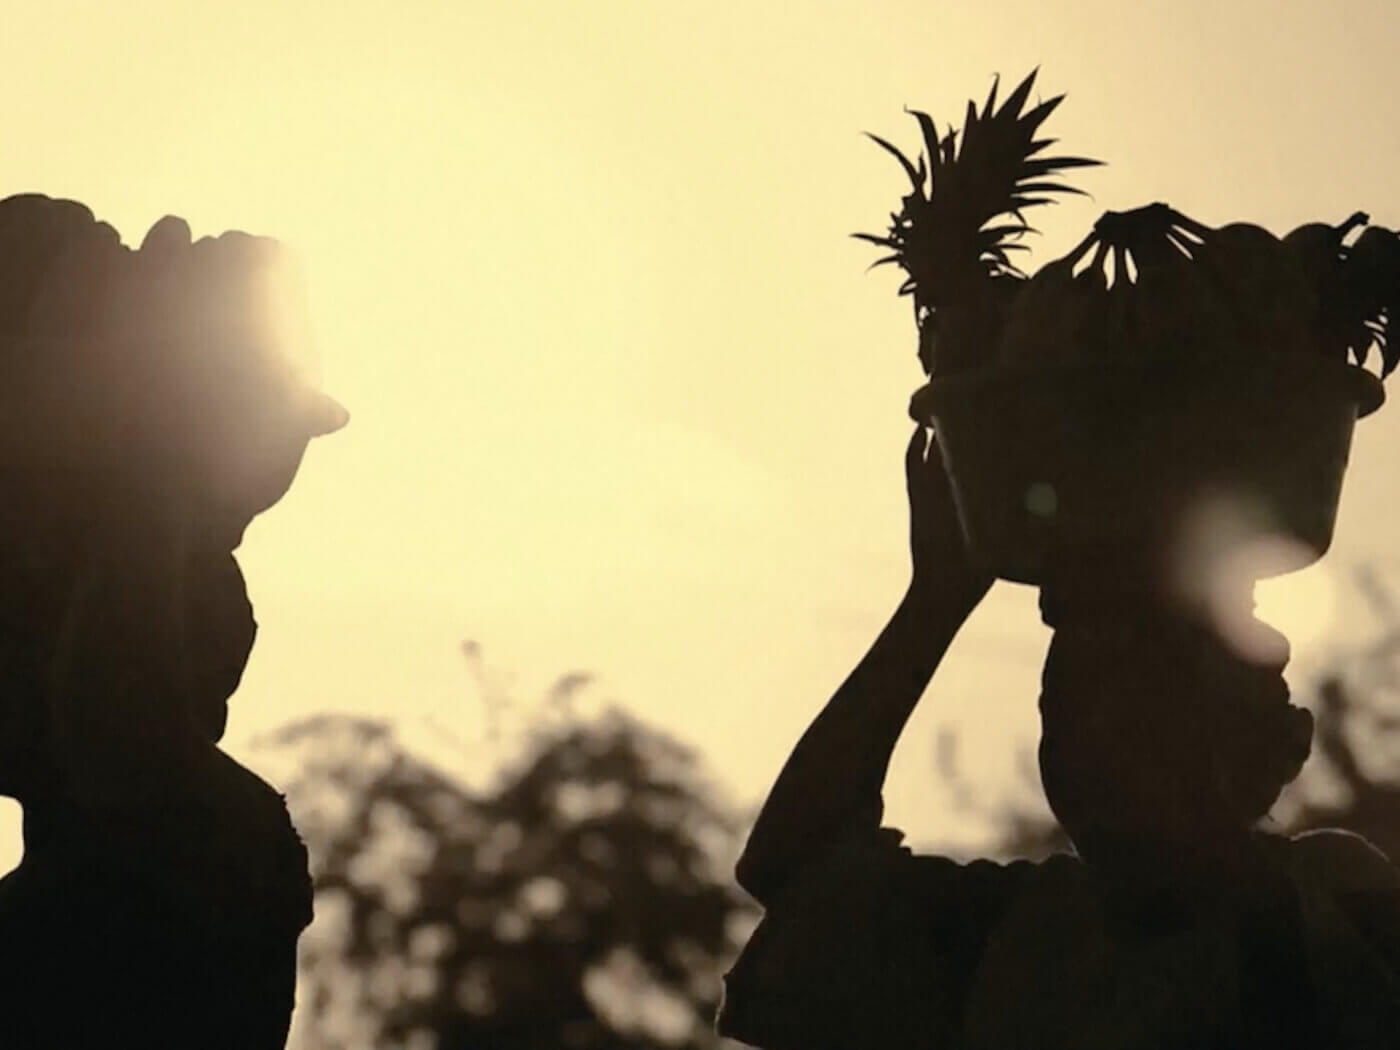 Silhouette of women with baskets on their heads